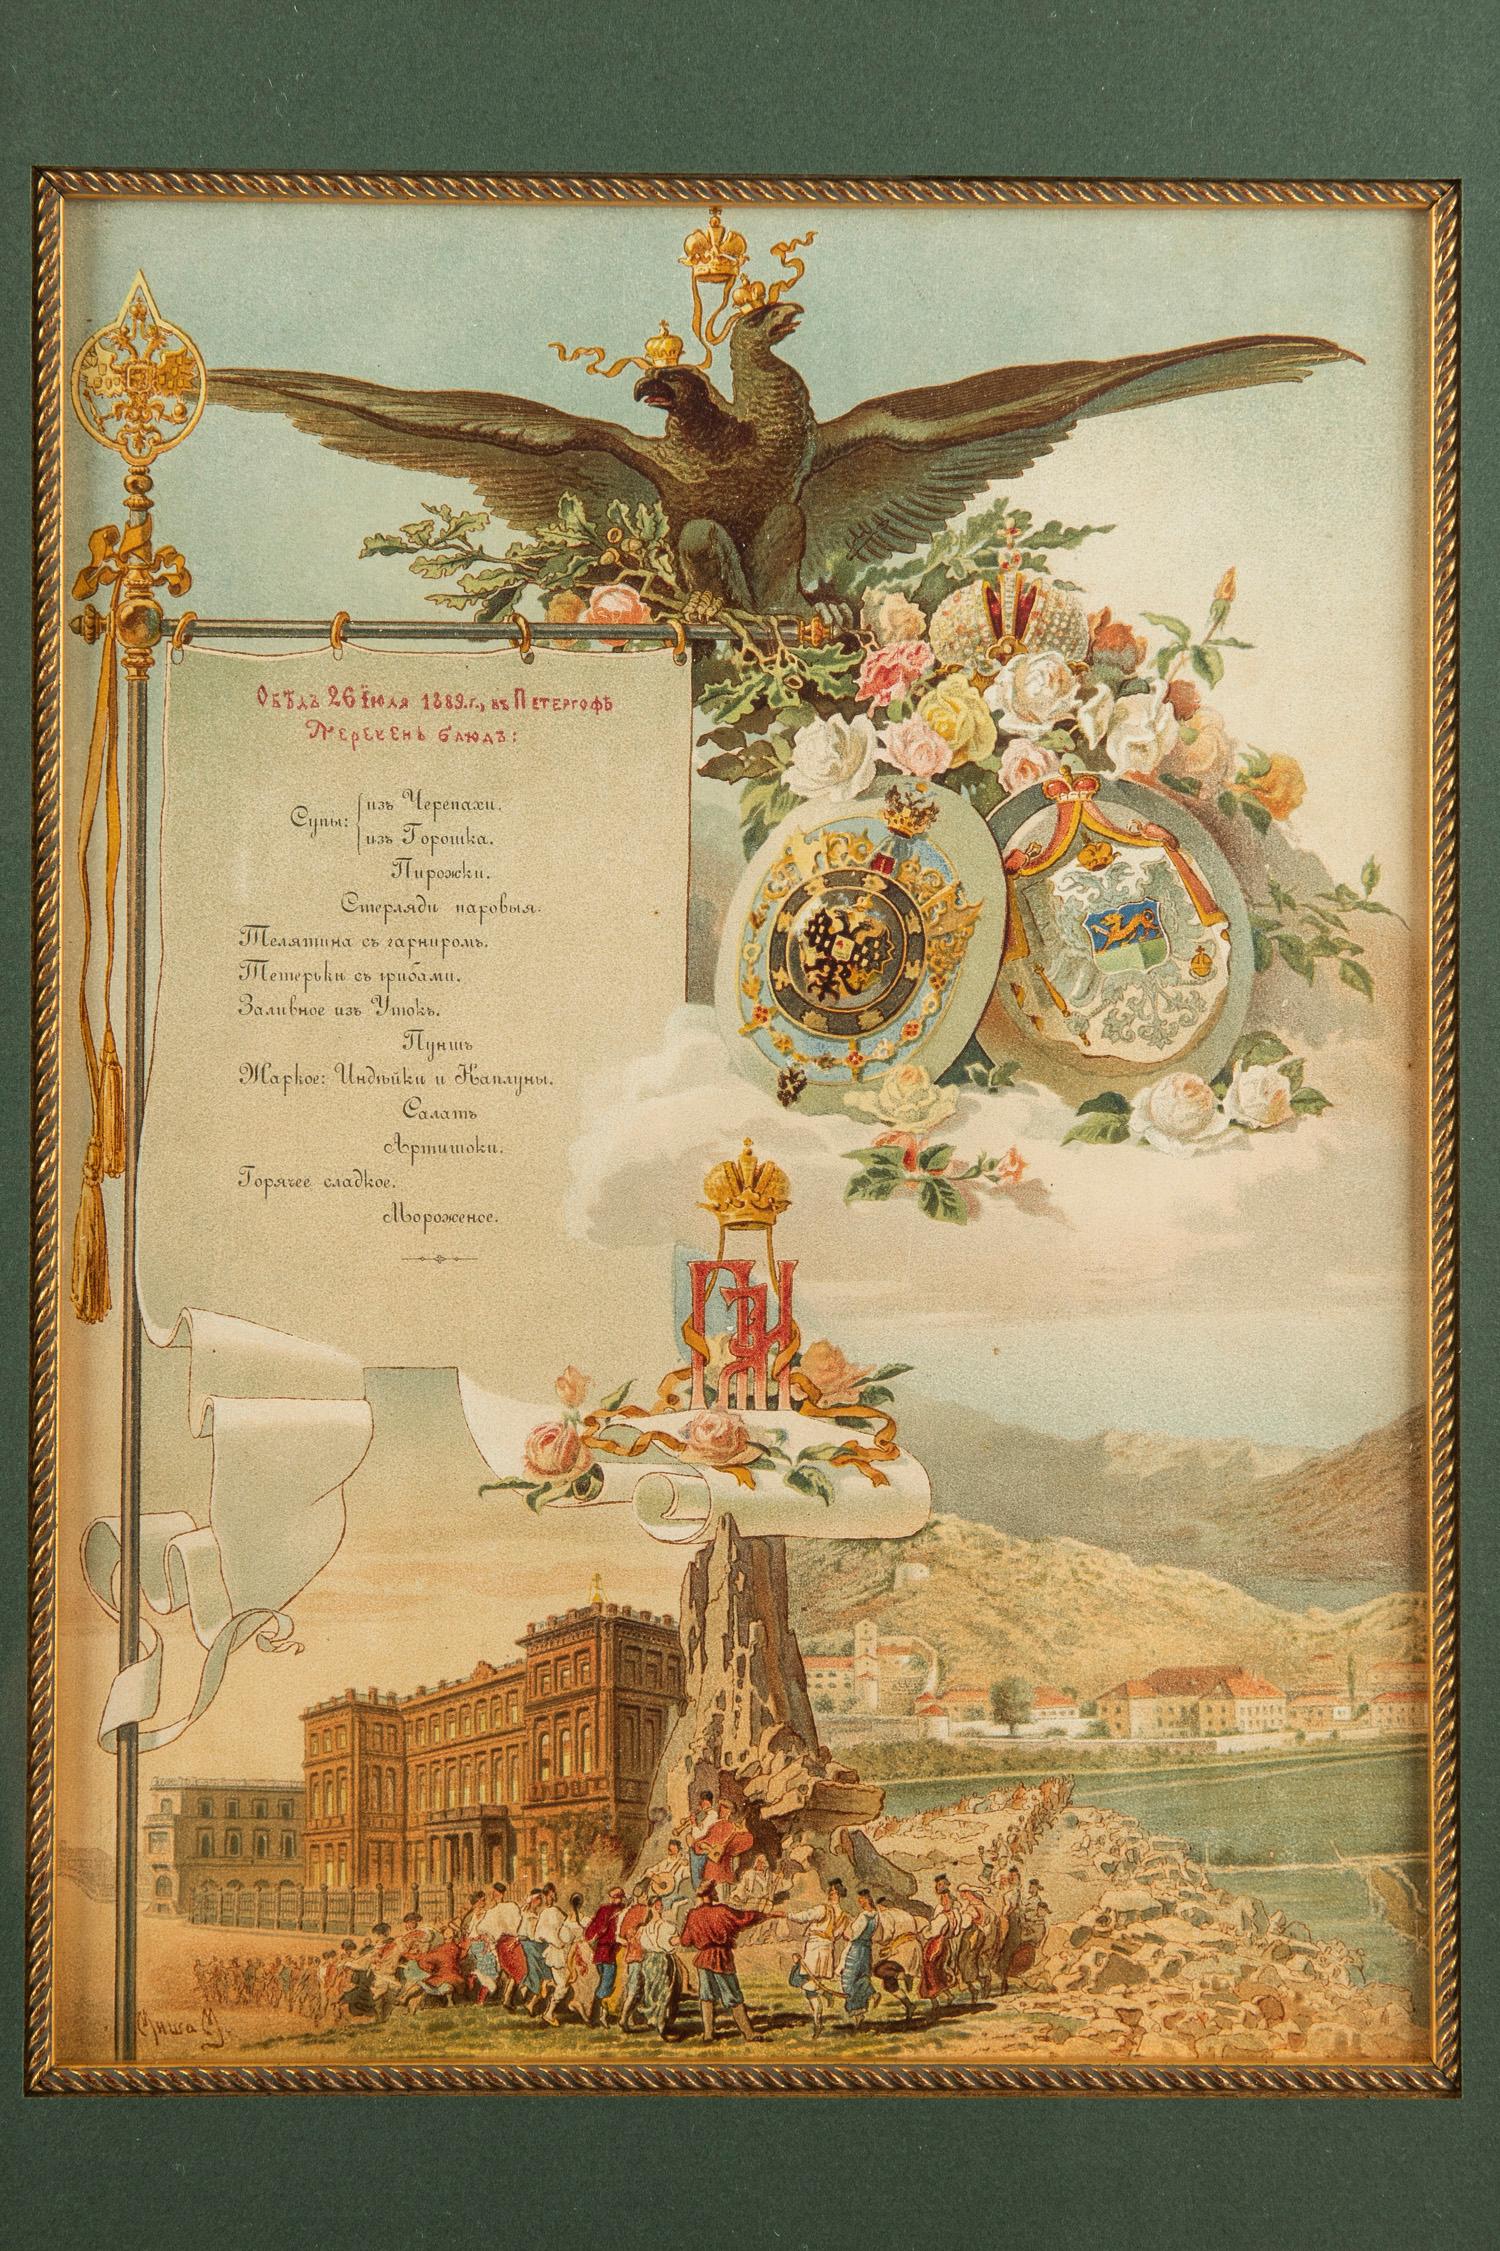 In Russian, dated July 26, 1889, Peterhof  

Chromolithograph, depicting a double-headed eagle above Romanov Imperial crown amidst a bouquet of roses surmounting the oval shields of the respective royal families, the center with crowned initials of